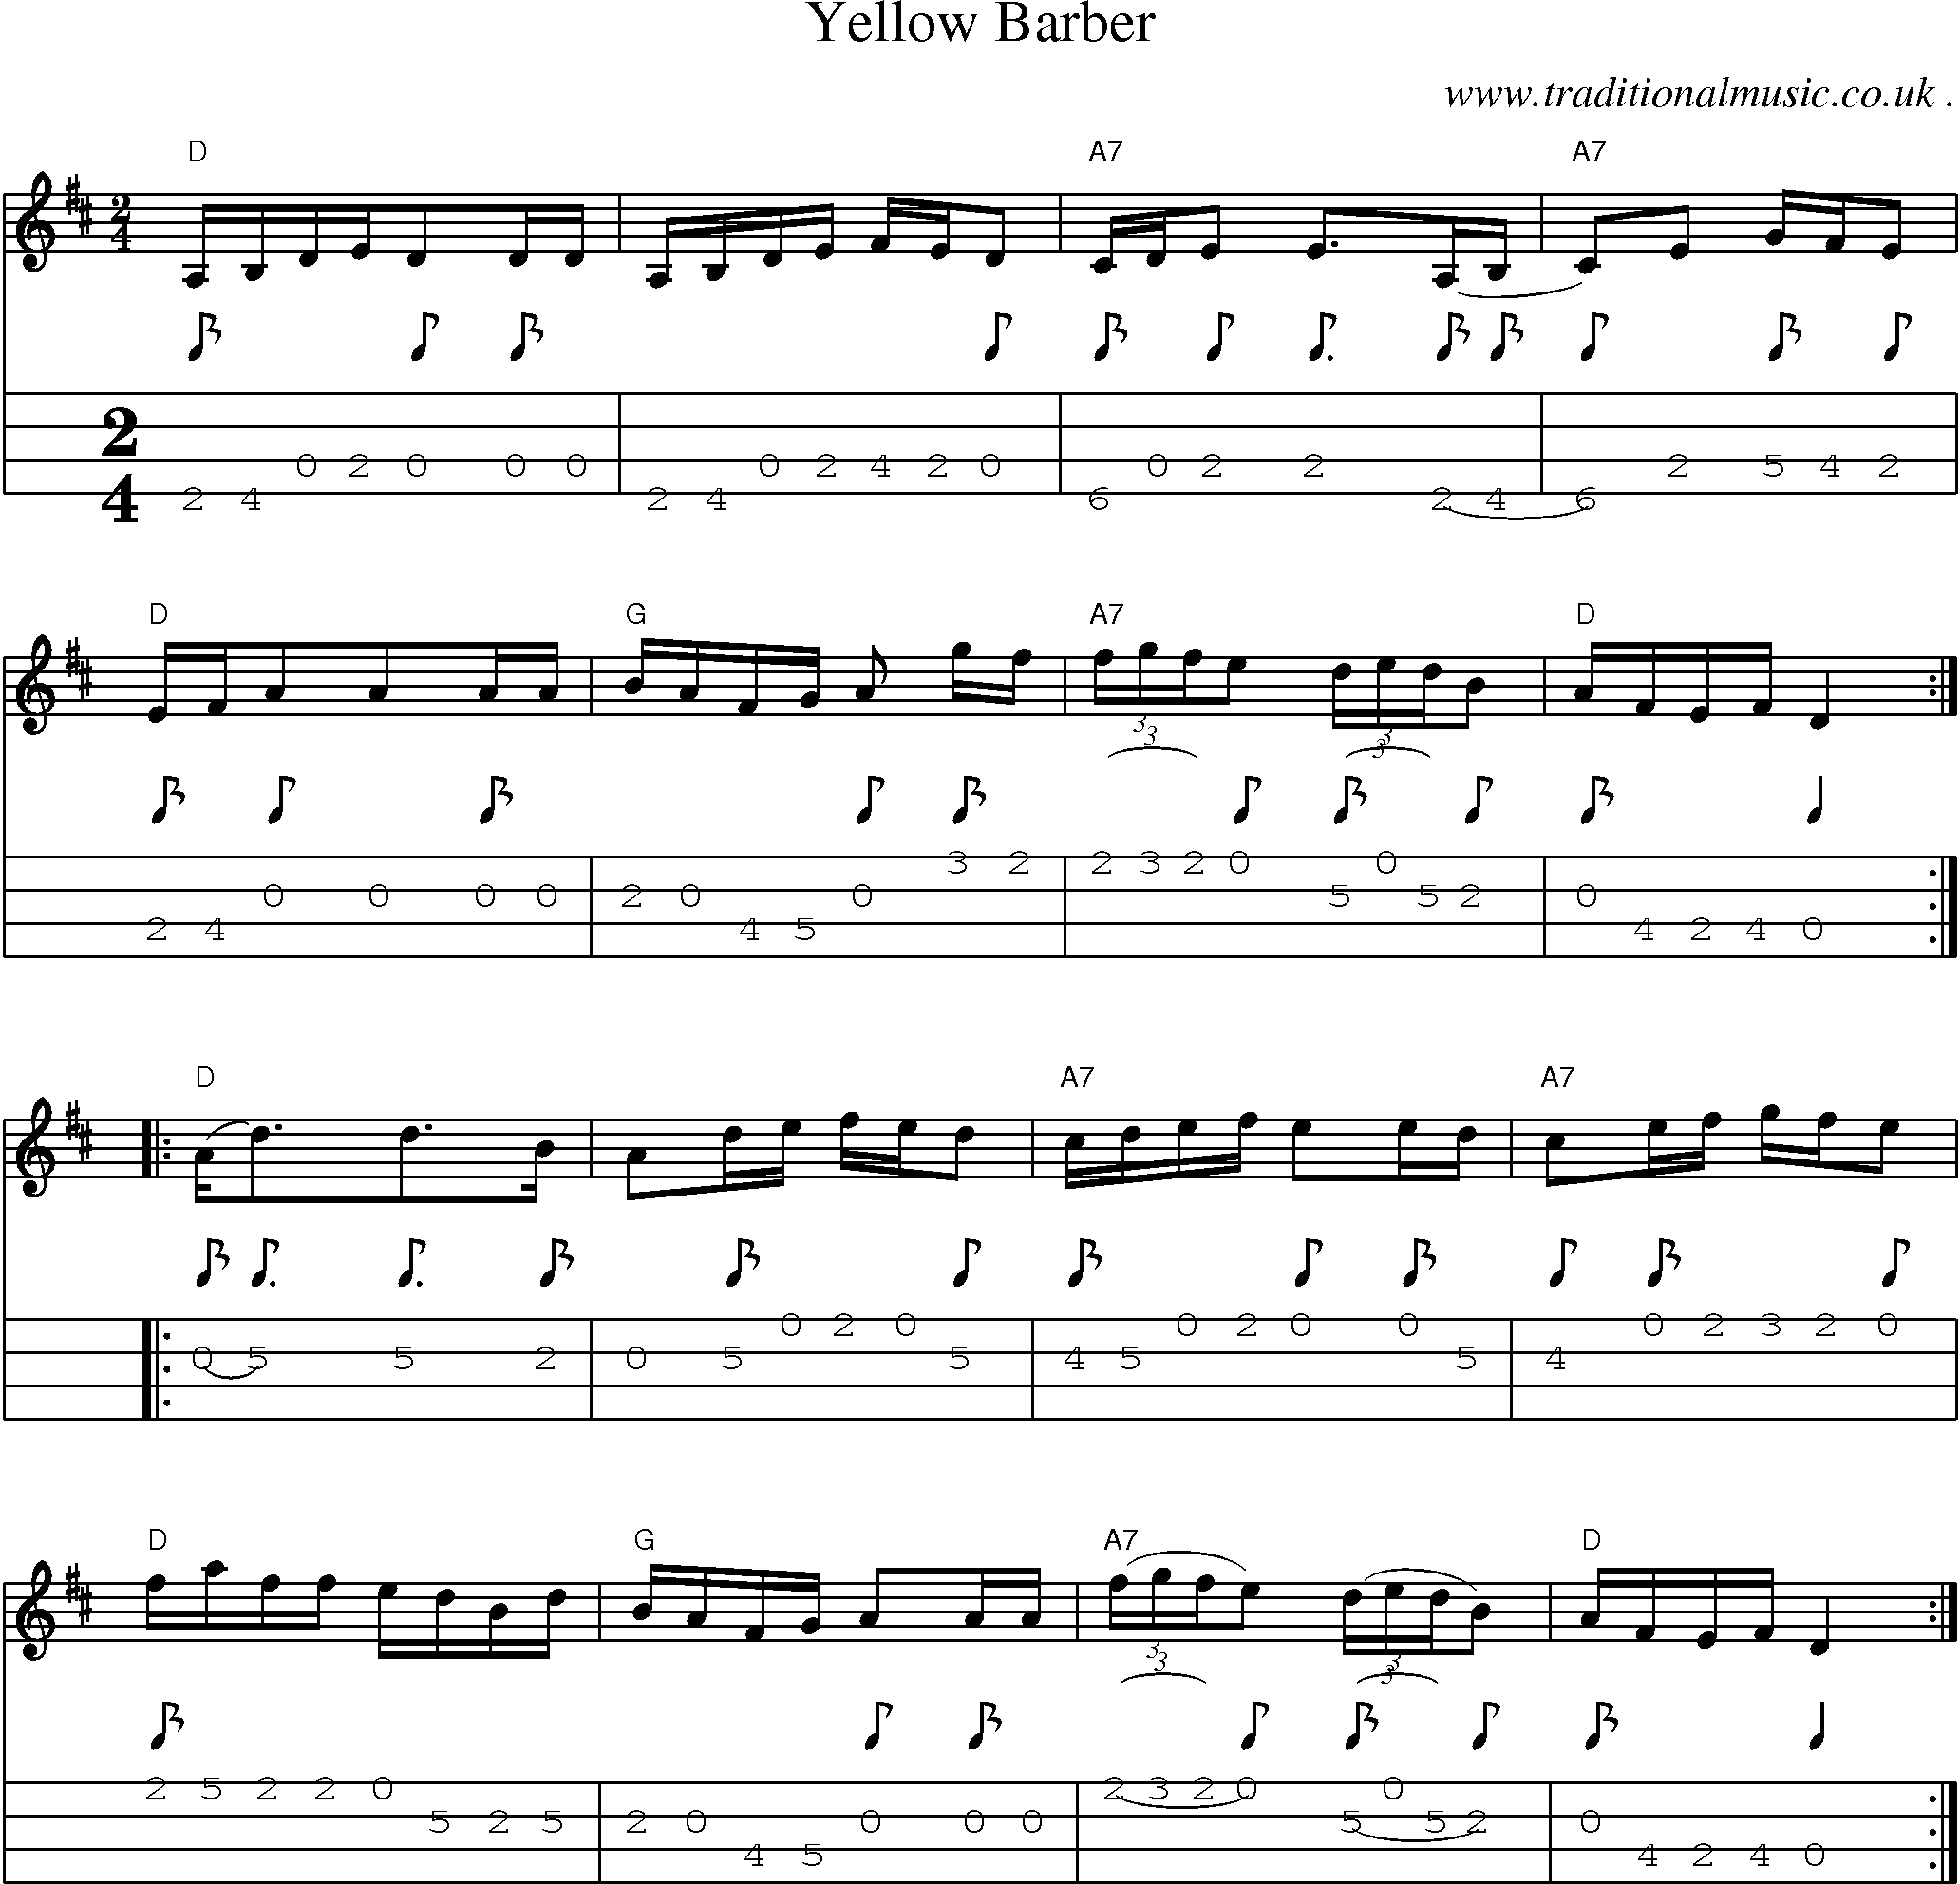 Music Score and Guitar Tabs for Yellow Barber